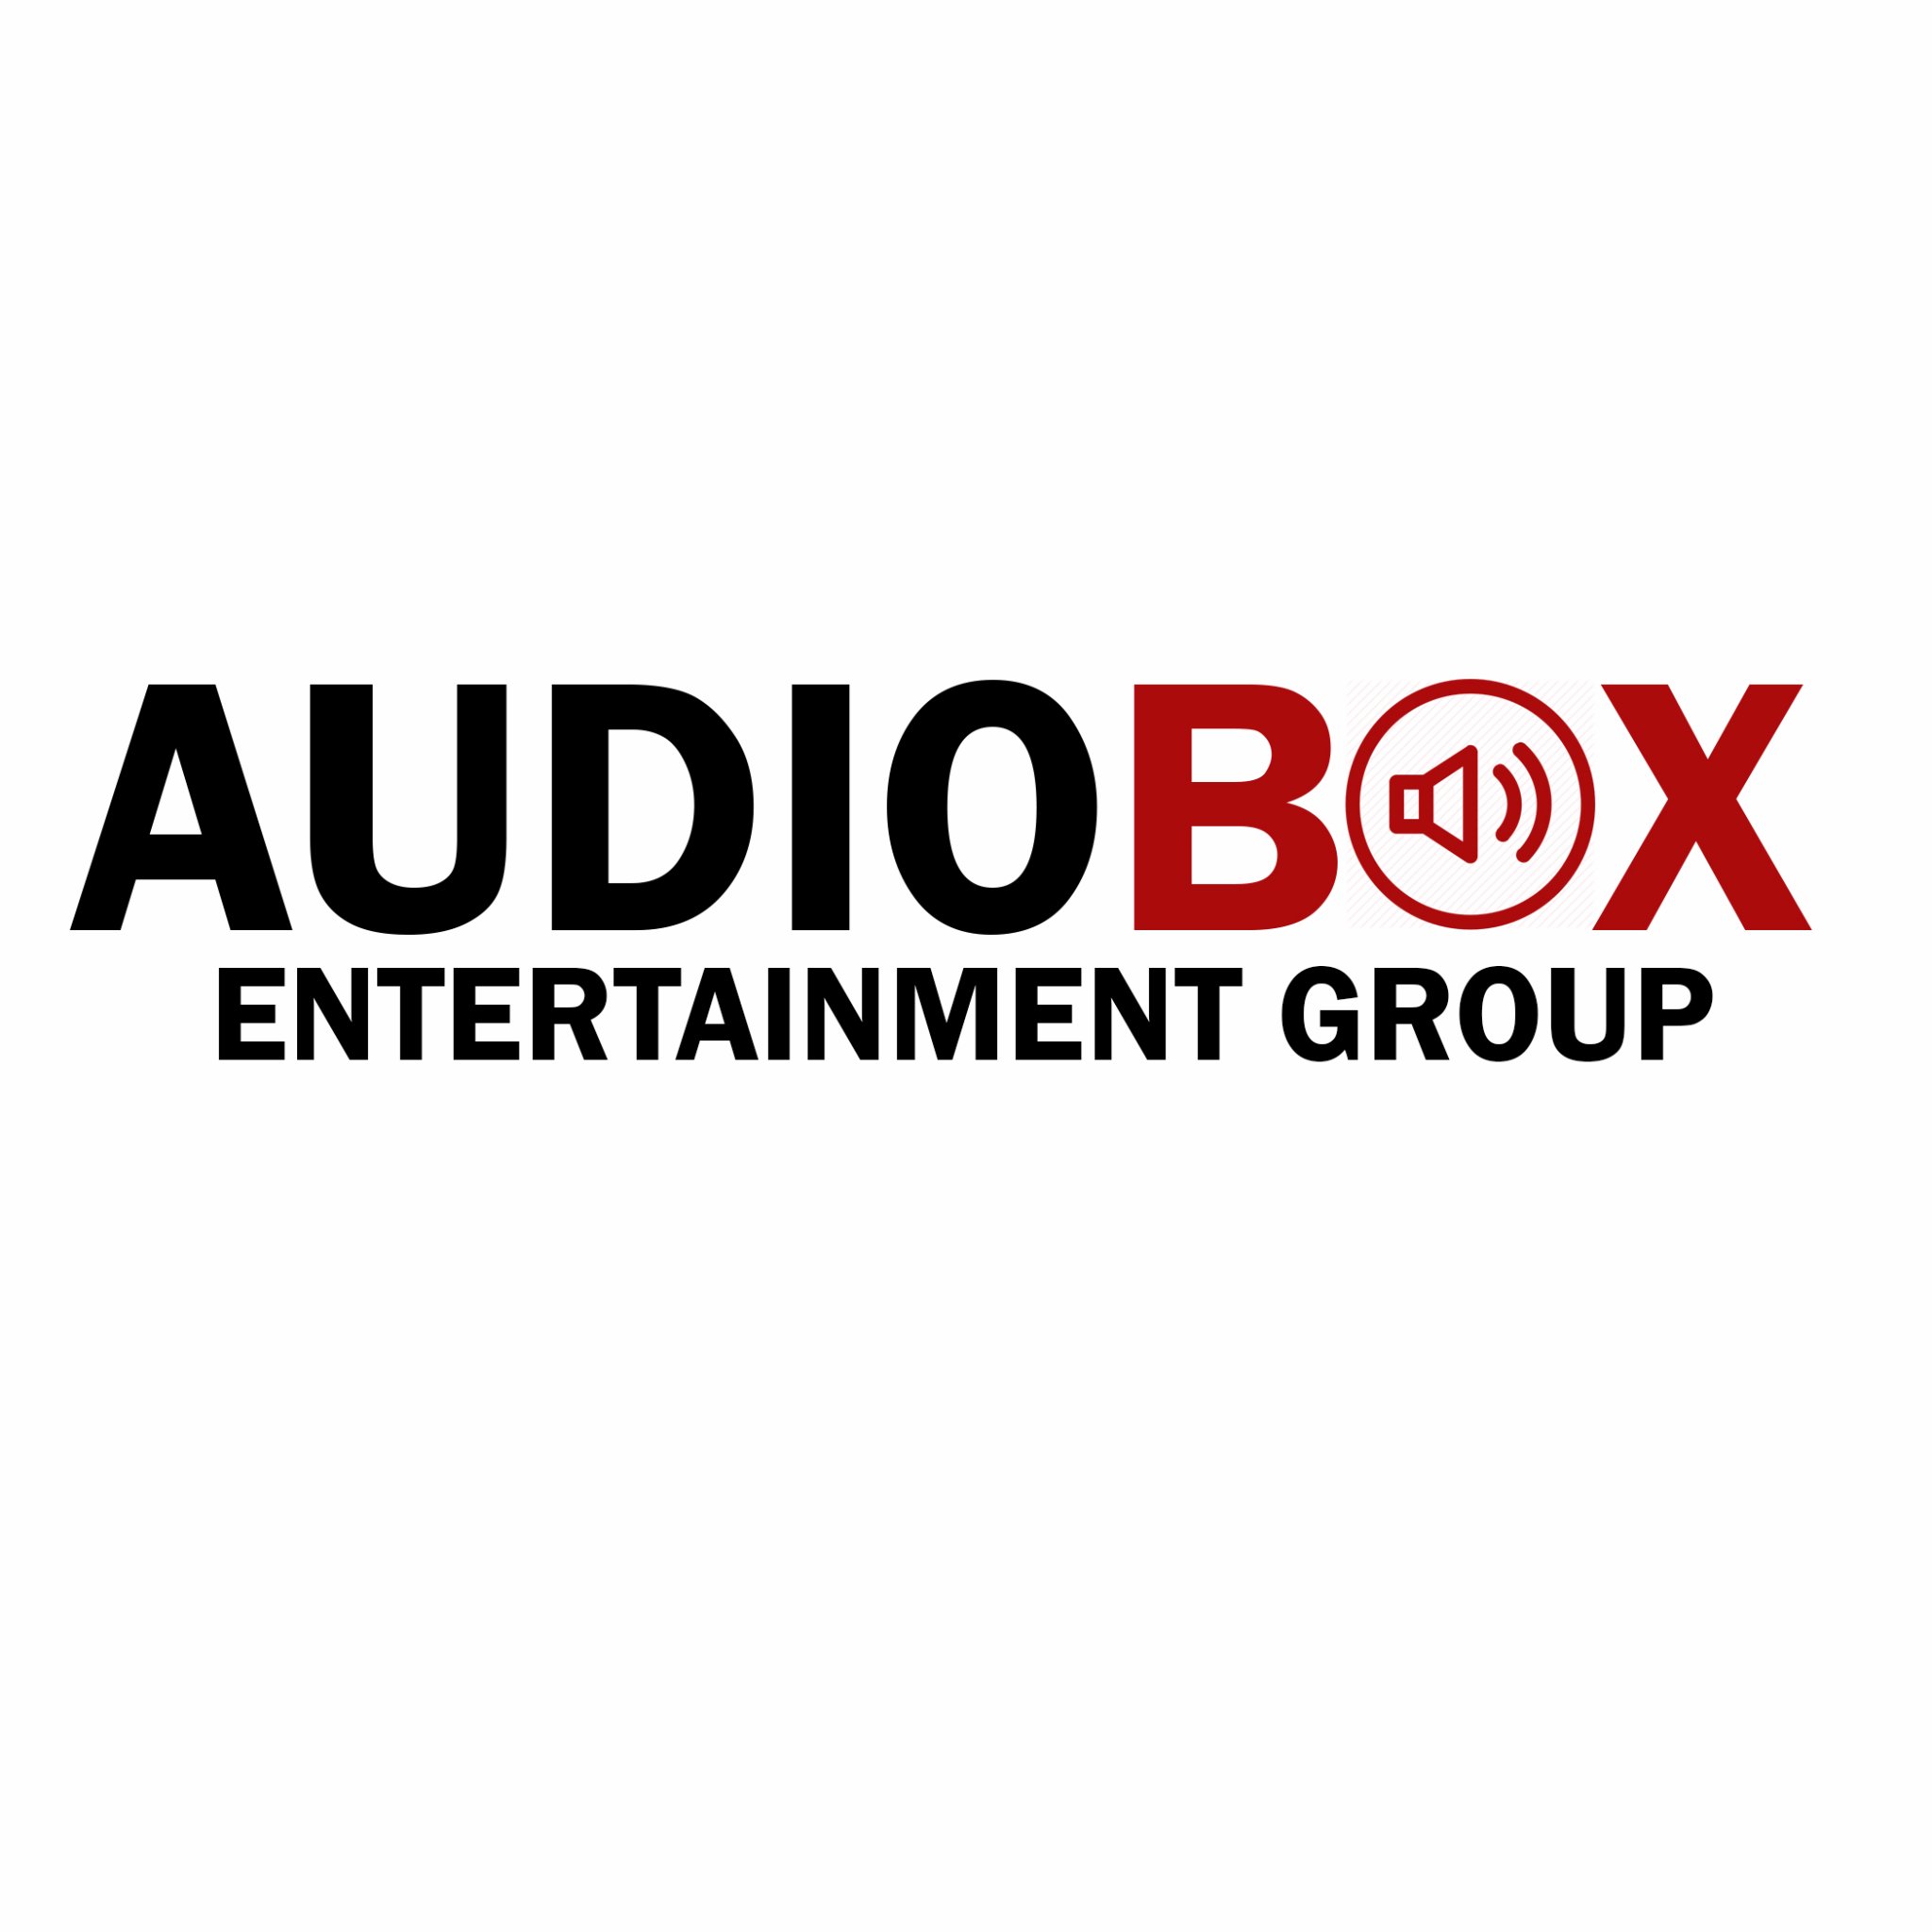 AUDIOBOX Entertainment Group - A full service sound and lighting rental company bringing you the very best live sound in the area! NJ, PA AND NY!